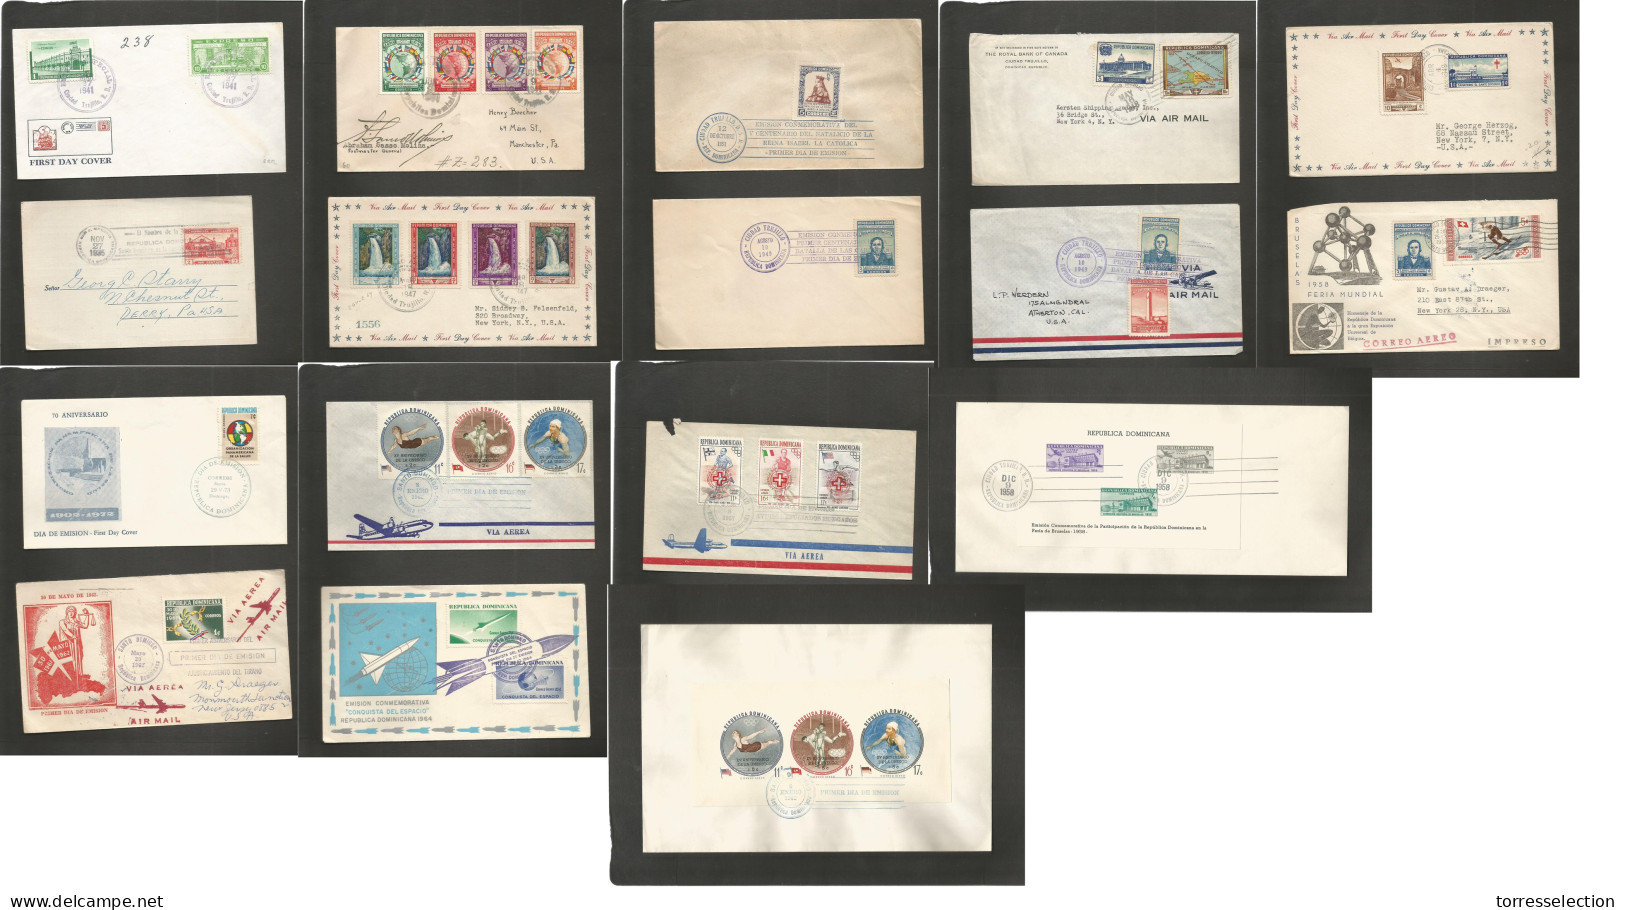 DOMINICAN REP. 1935-62. FDC + Special Cachets Selection. Incl 2 Min Sheets Used + 1941 Rare FDC. Fine Group Opportunity. - República Dominicana